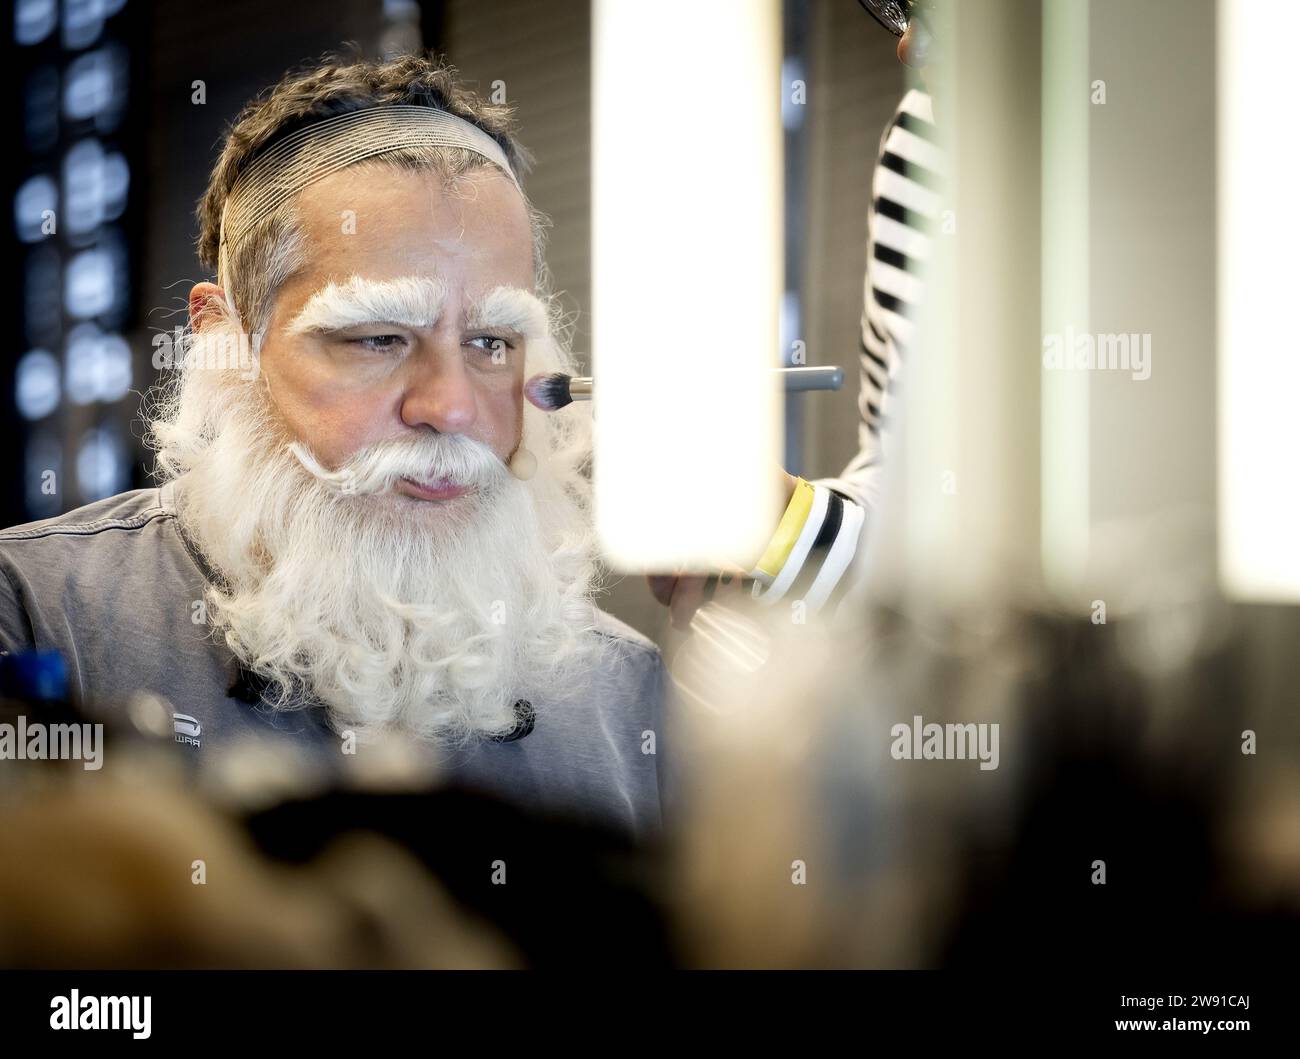 Amsterdam, Netherlands. 23rd Dec 2023. AMSTERDAM - Frank Lammers is getting ready for the Christmas show Santa Claus is coming to Town in the Ziggo Dome. The actor takes on the role of Santa Claus for the show. ANP KOEN VAN WEEL netherlands out - belgium out Credit: ANP/Alamy Live News Credit: ANP/Alamy Live News Stock Photo